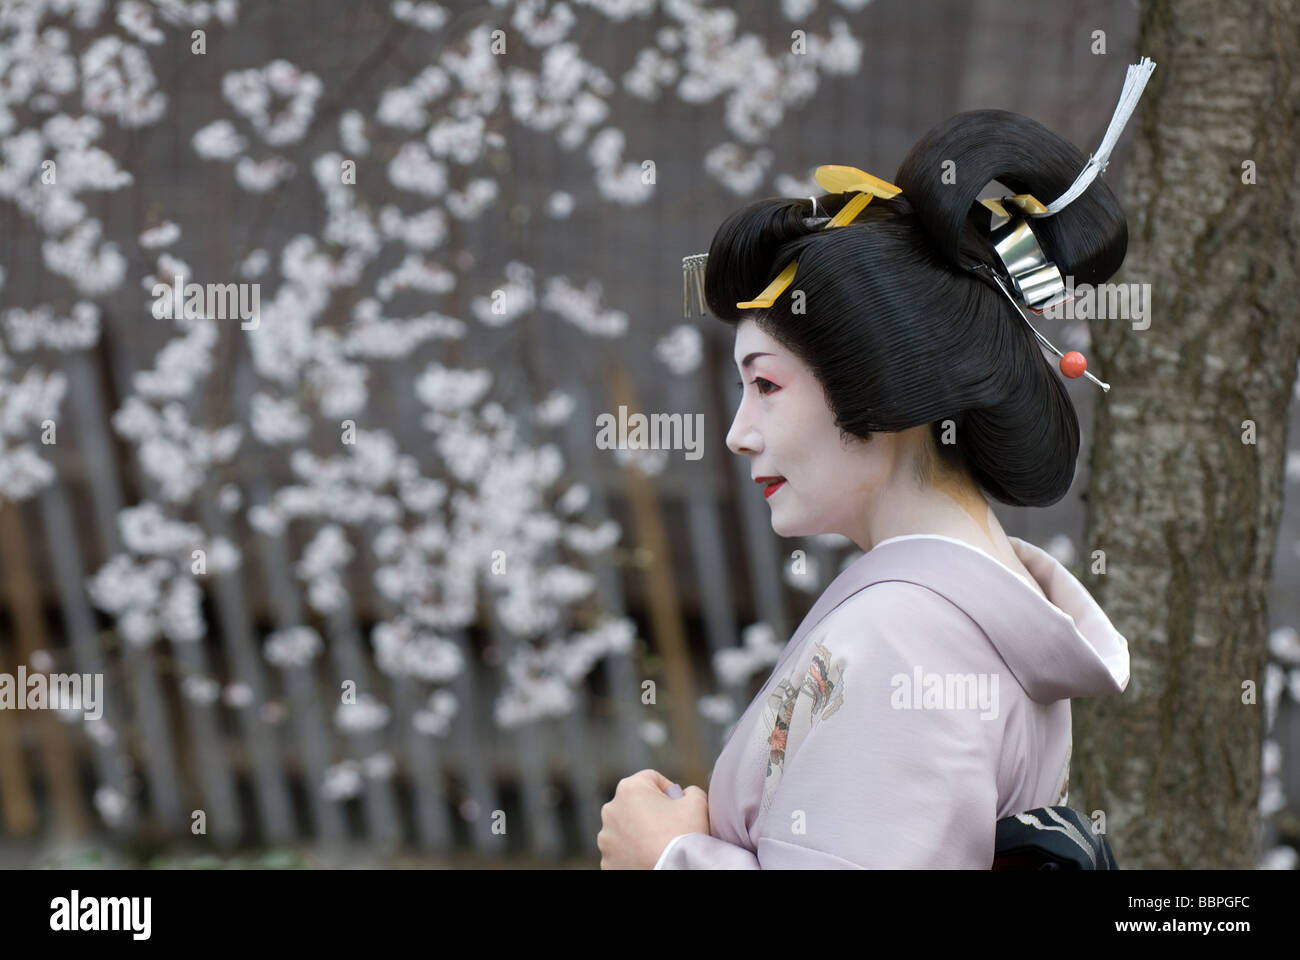 A portrait of a geisha, or geiko, during the cherry blossom season in Kyoto Japan Stock Photo